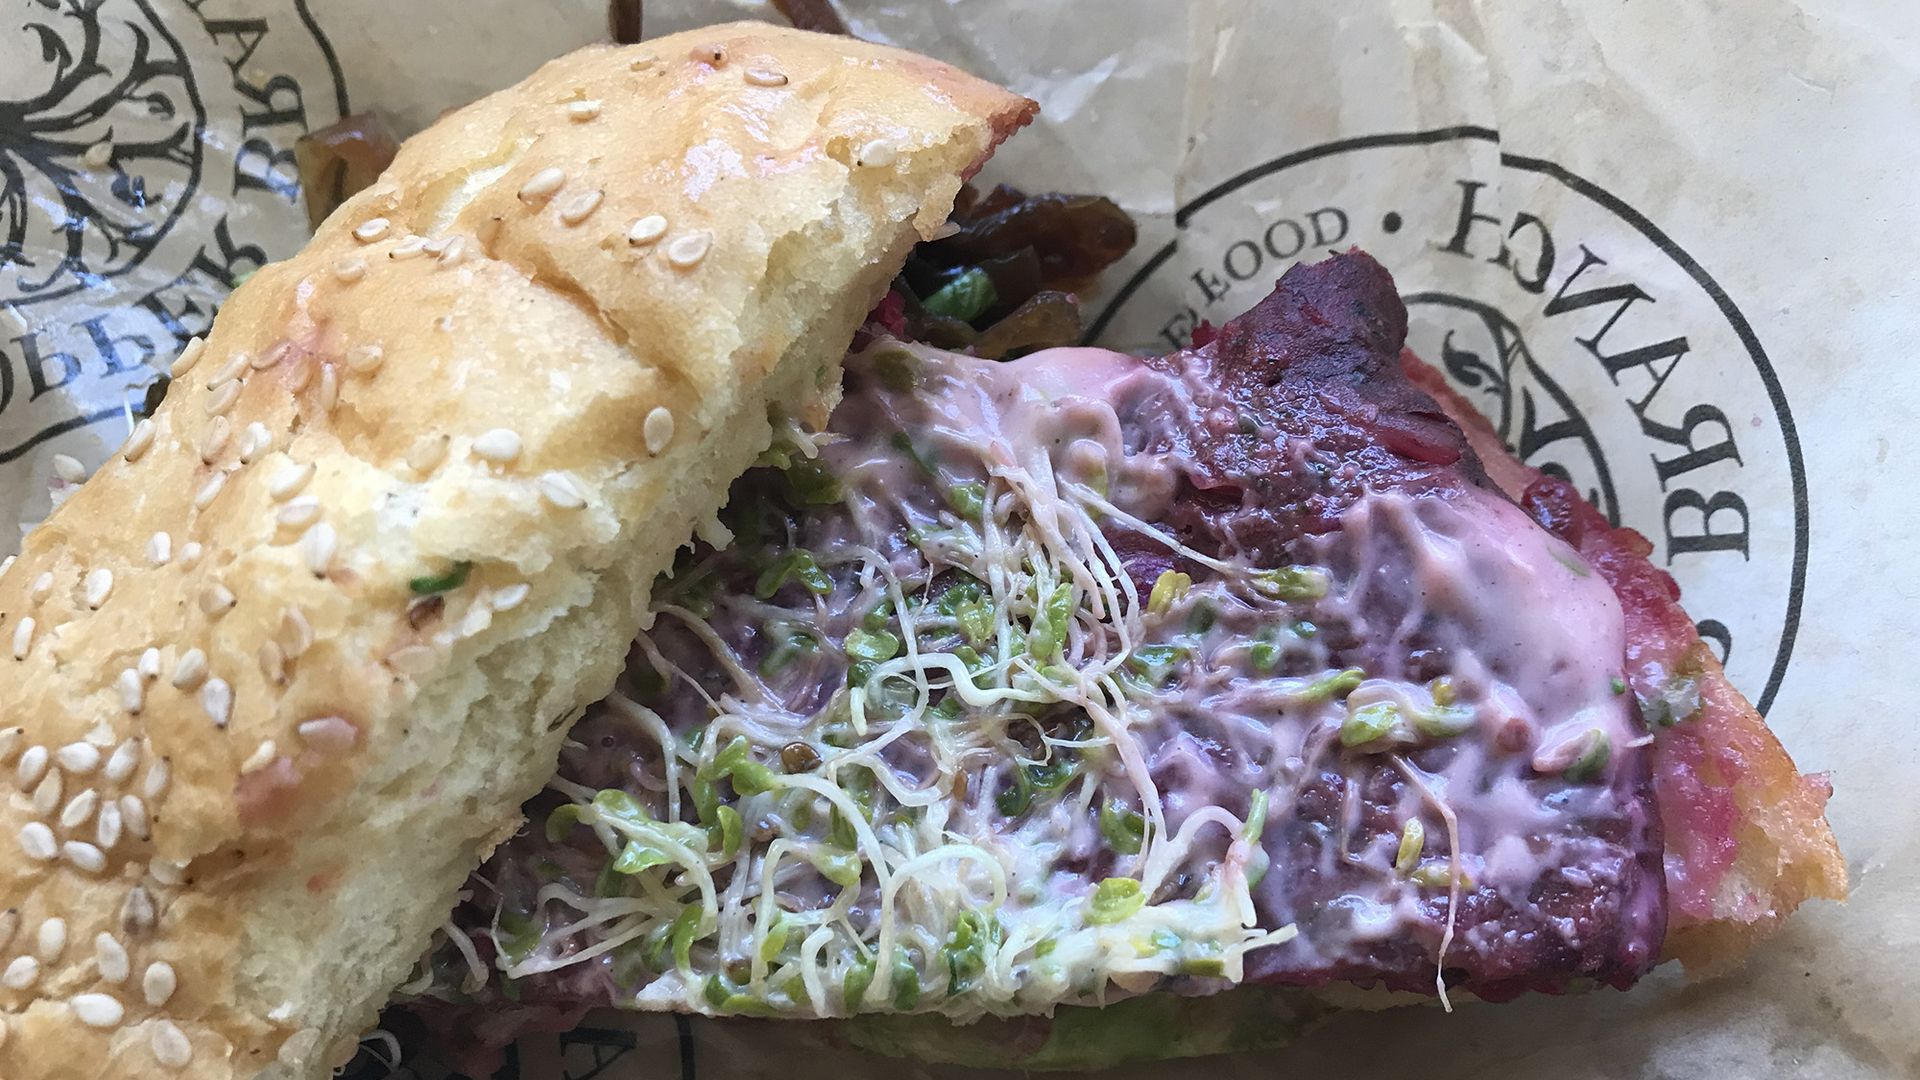 A beet patty with organic brown rice, pea protein, sesame seeds, organic hemp and sunflower seeds, topped with Dijon vegenaise and alfalfa sprouts. 